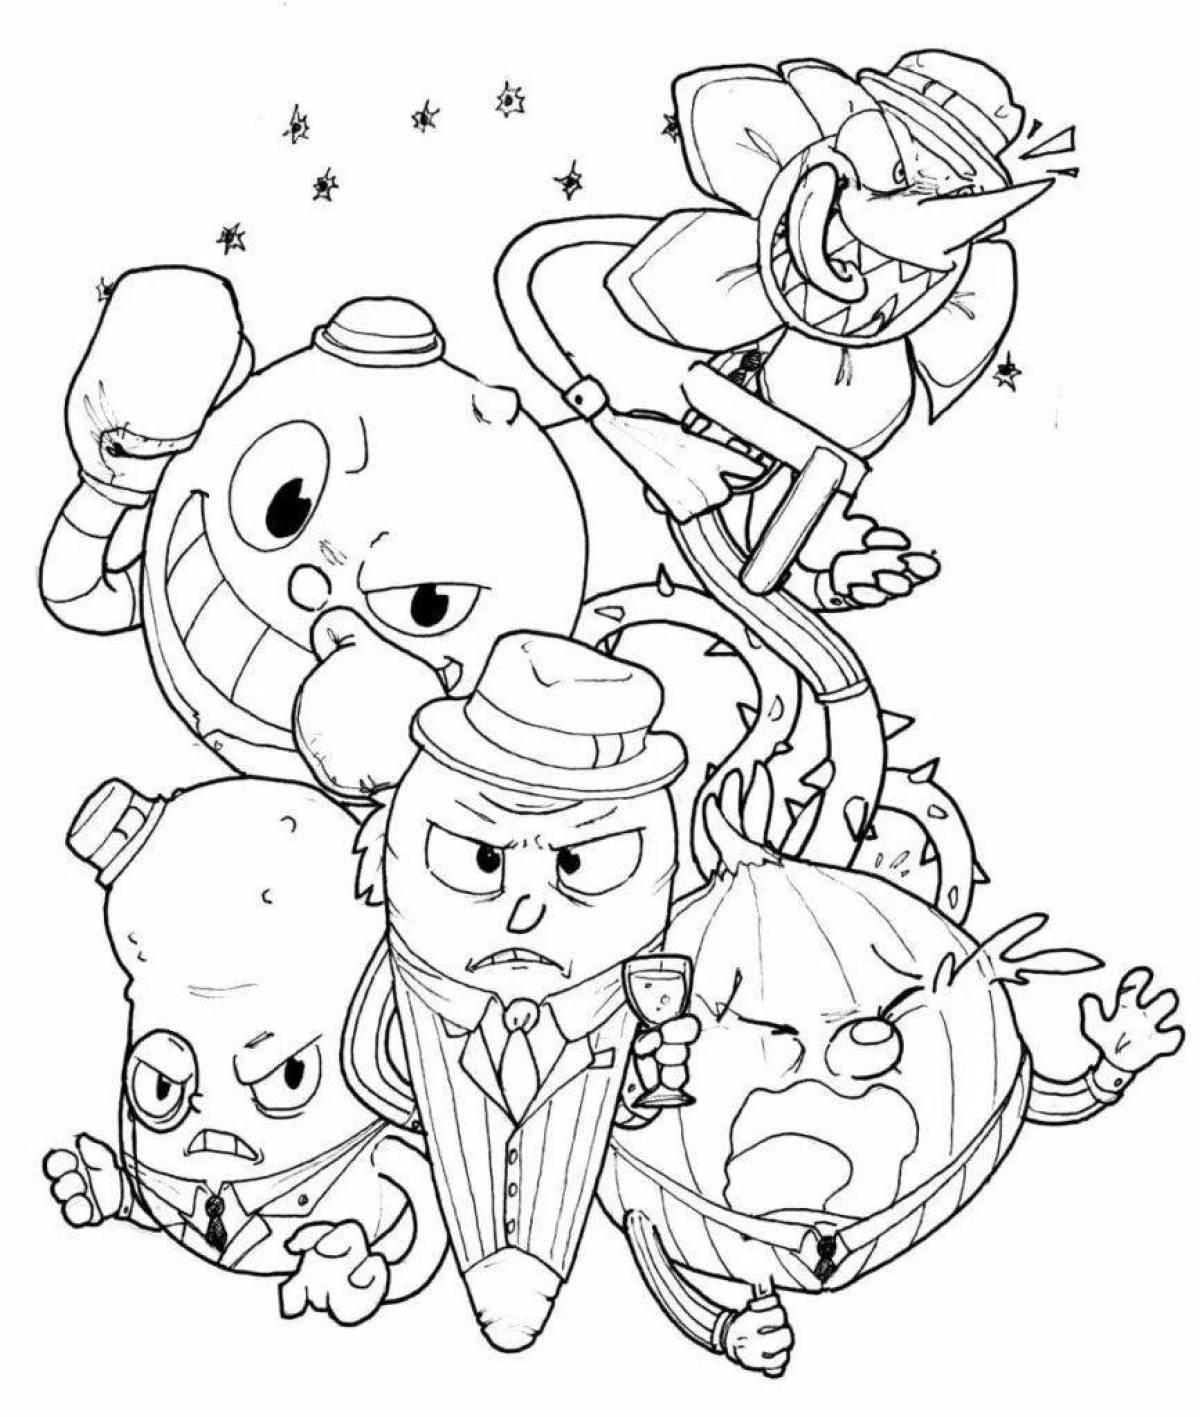 Bright cuphead coloring page